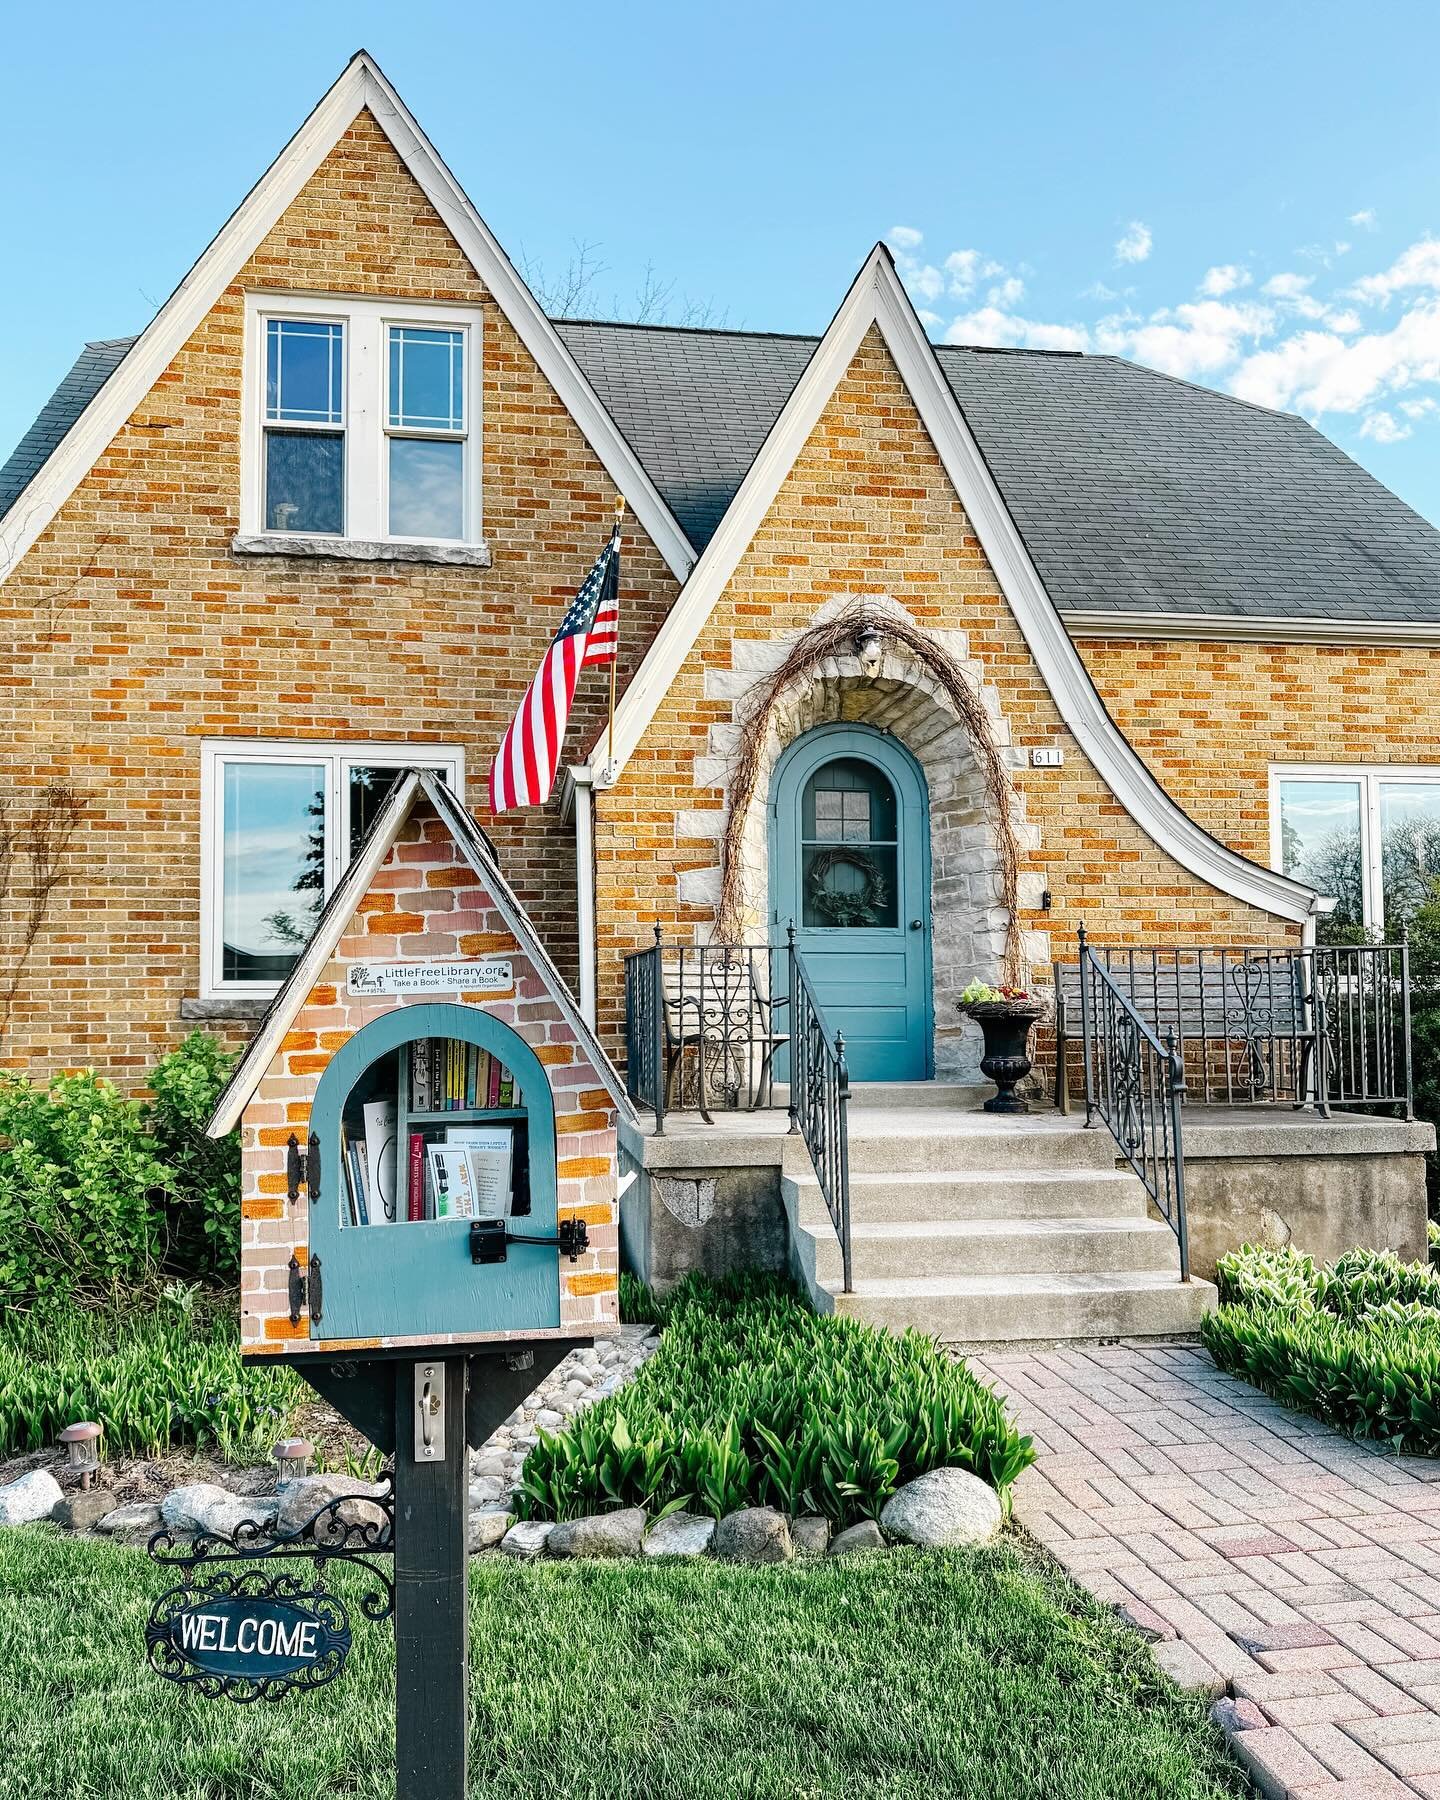 It&rsquo;s @littlefreelibrary week!! We built our own &ldquo;LFL&rdquo; four years ago and I have loved maintaining it and sharing books and more with my community ever since! My #twintudorlfl is so named for our storybook style cottage and its twin 